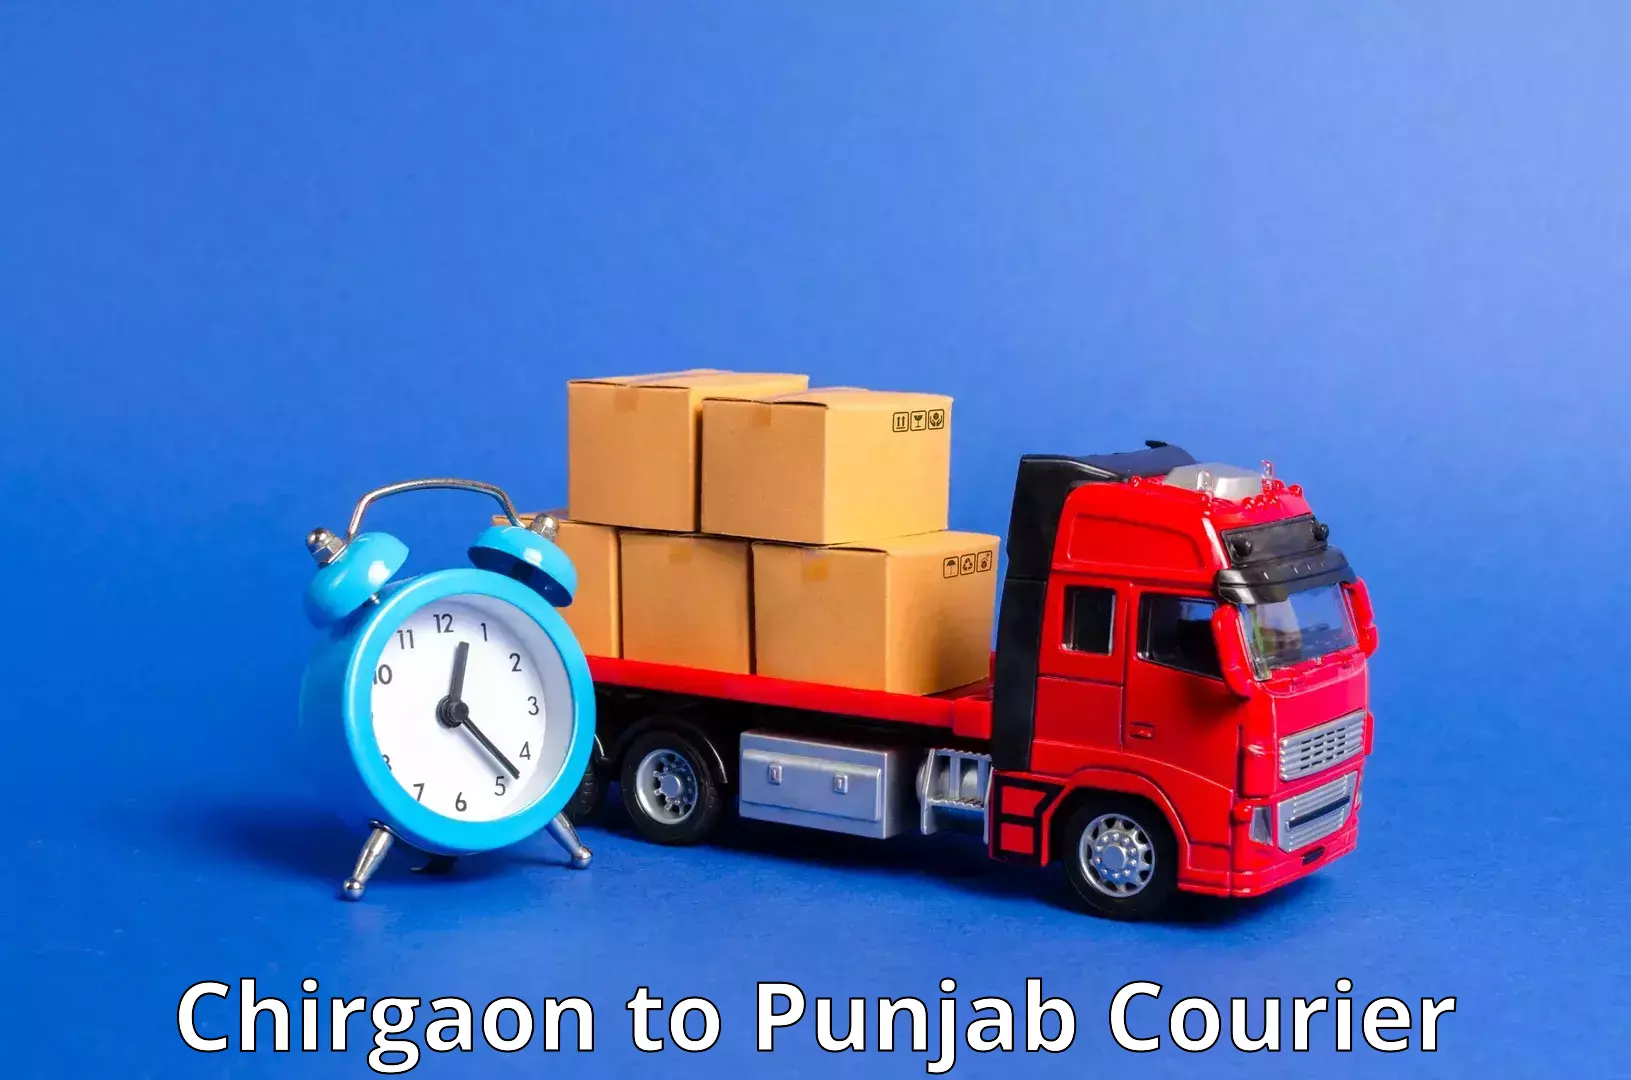 Affordable parcel service Chirgaon to Malout